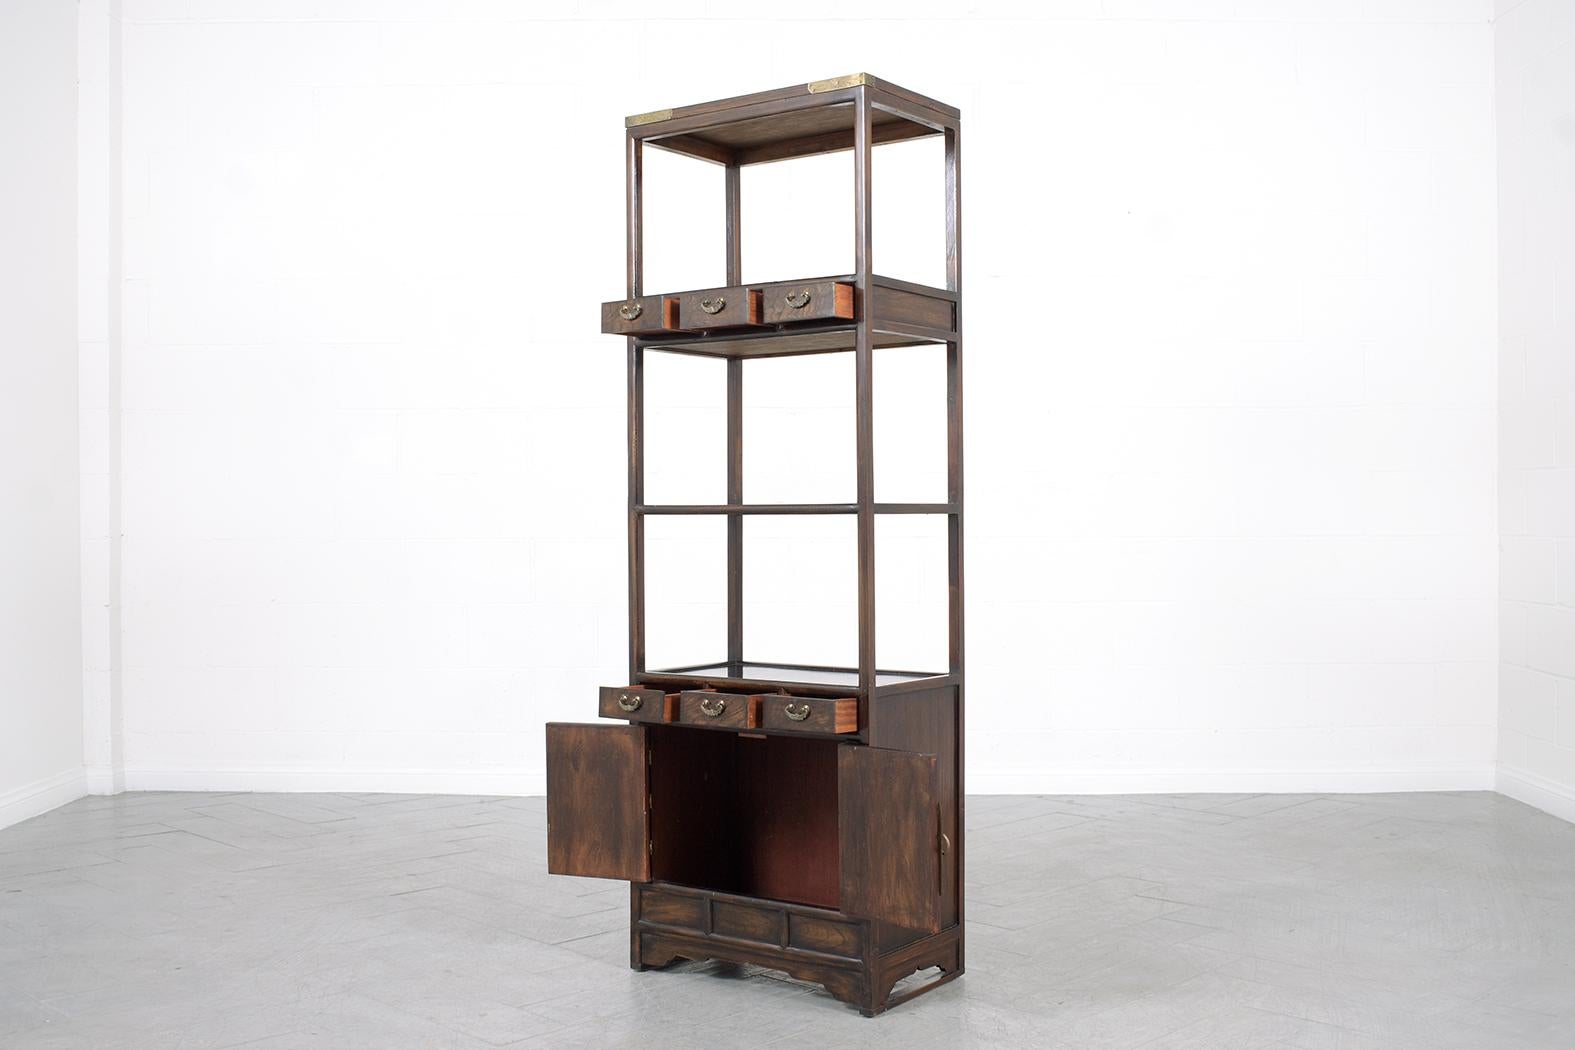 Late 20th Century Vintage Chinese Elm Wood Bookcase: A Statement of Timeless Craftsmanship